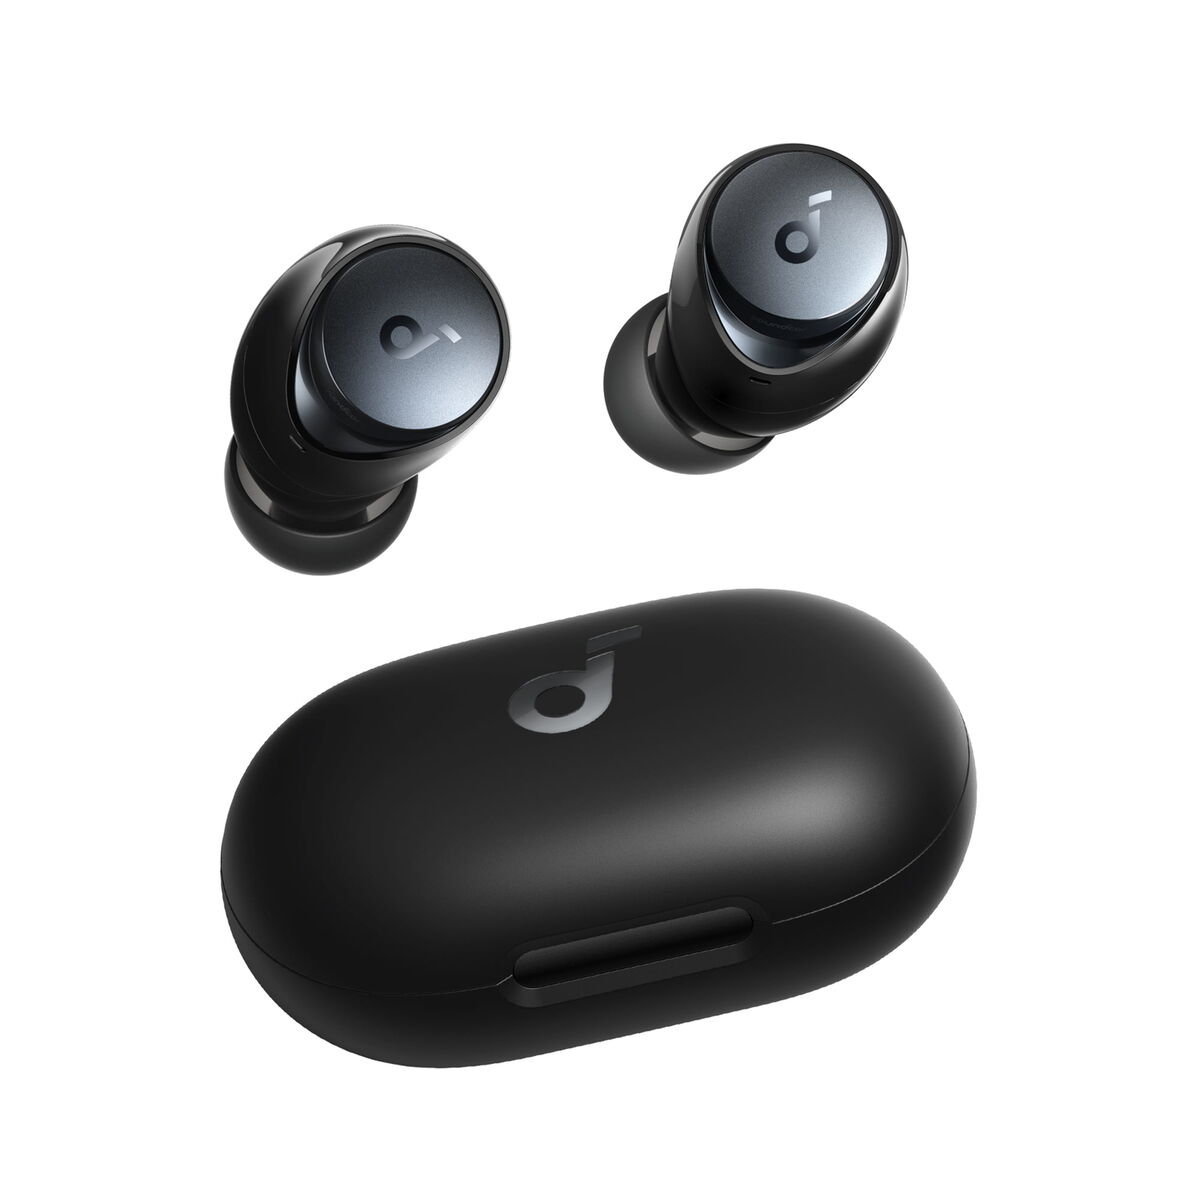 Step-by-Step Guide To Pair Turn It Up Wireless Earbuds